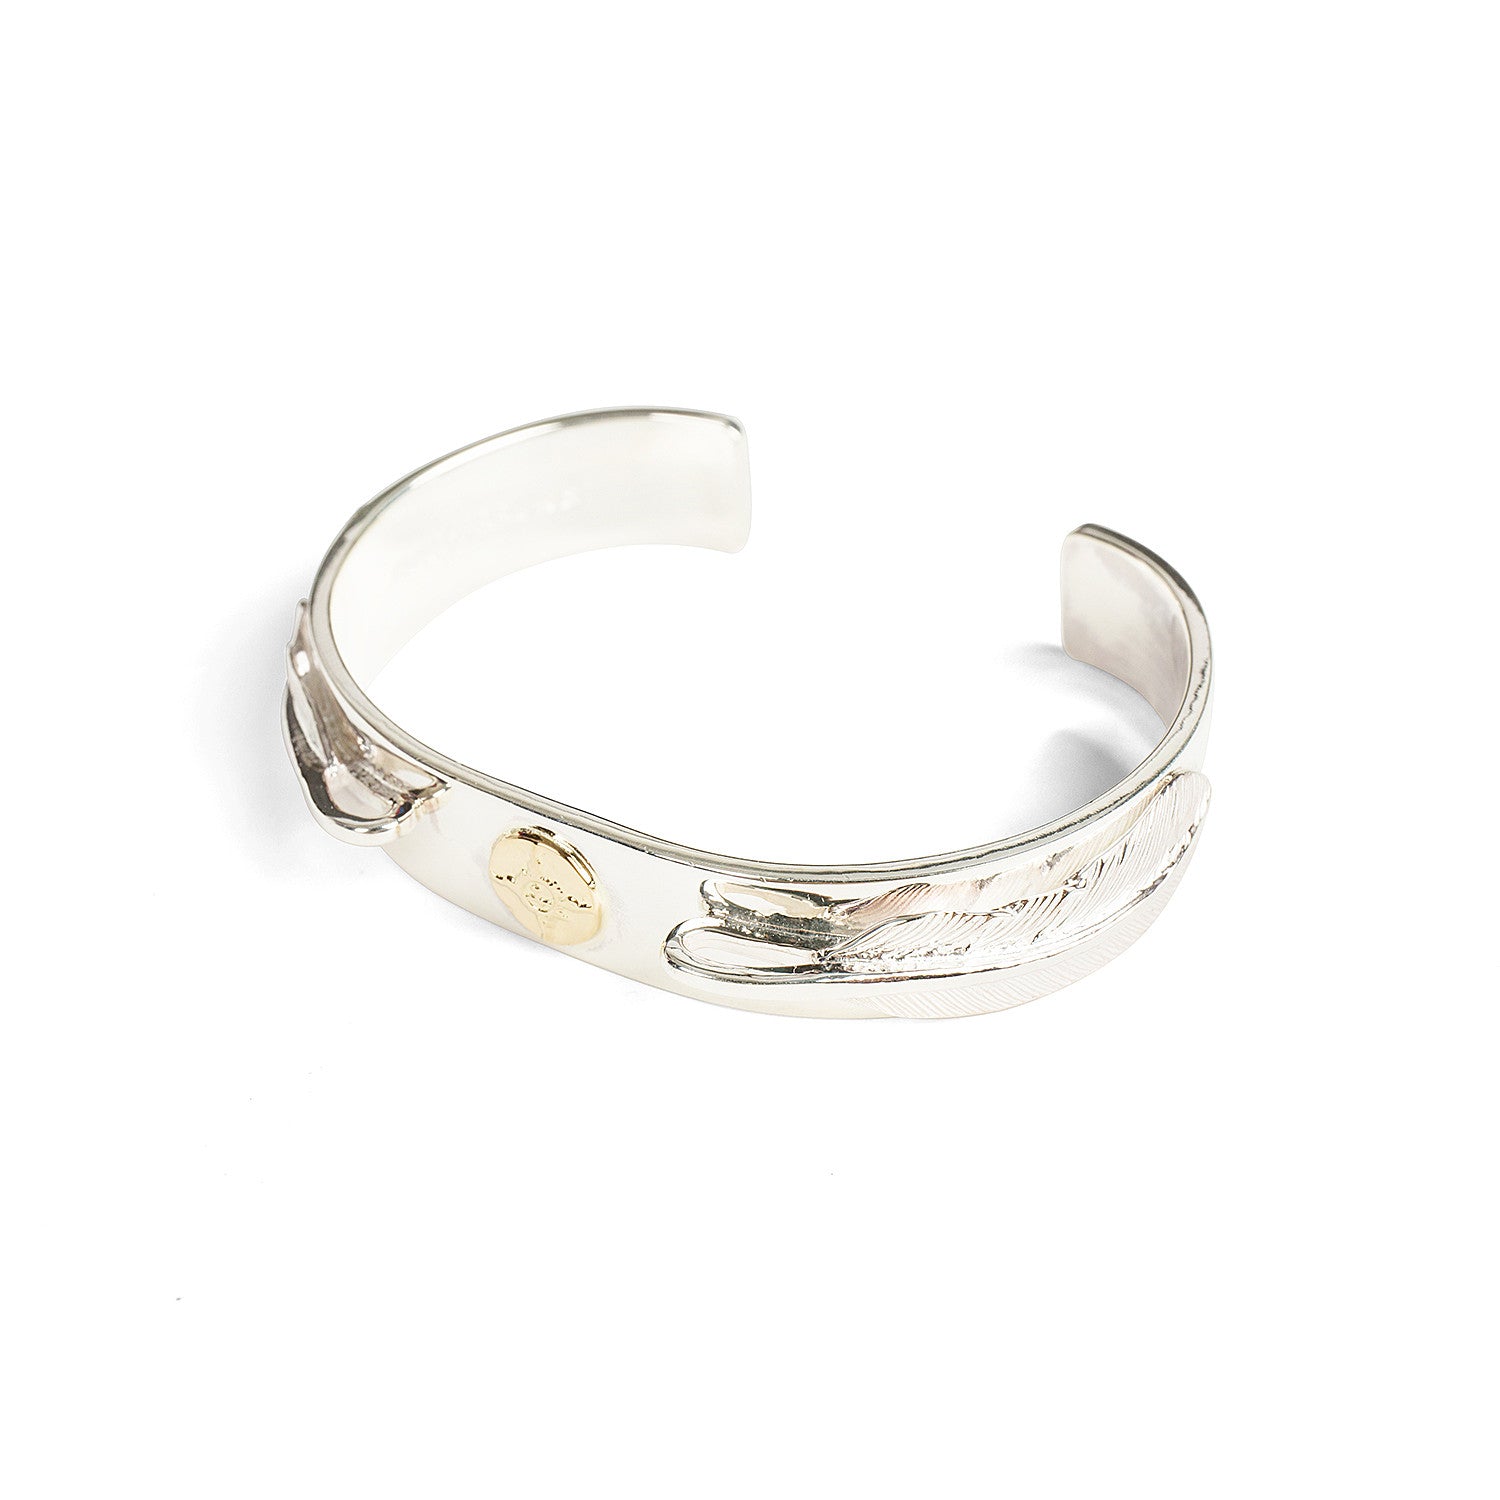 First Arrow's 18K "Sunburst" Standard Bangle With Twin Small Feathers (BR-025)